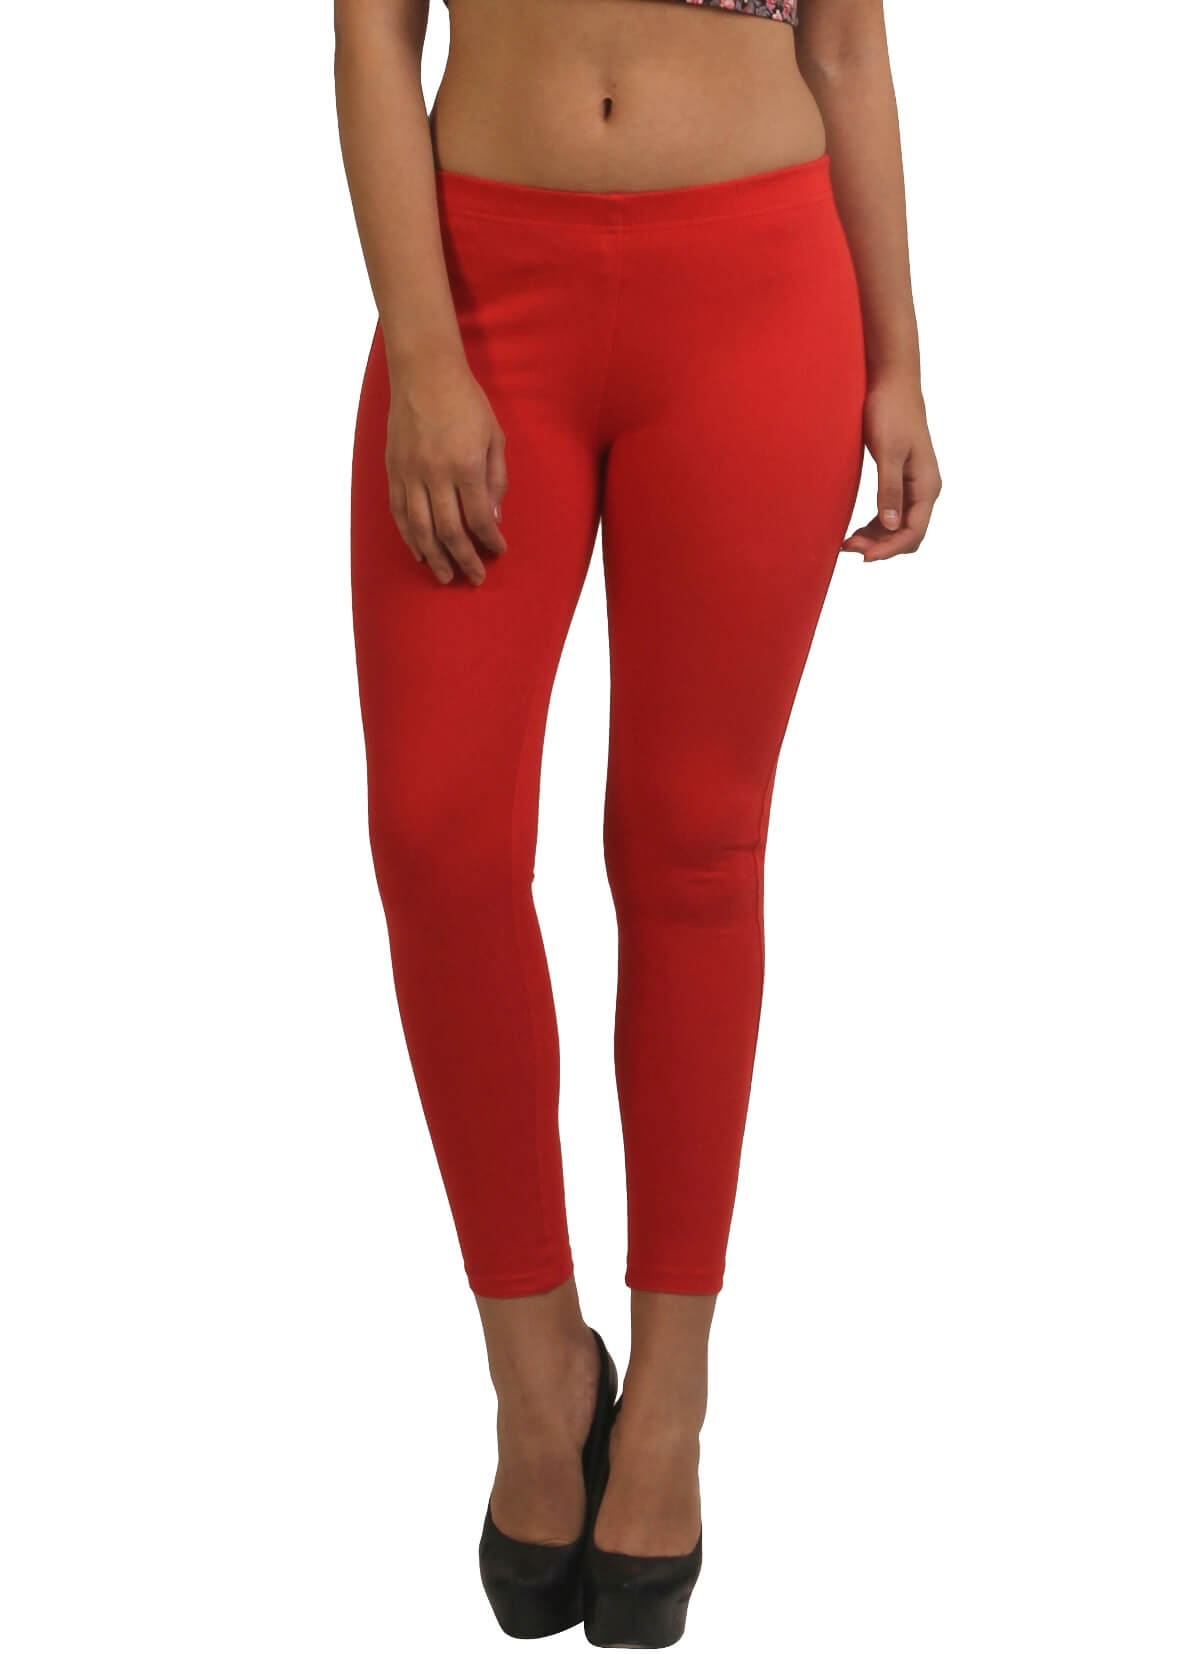 https://frenchtrendz.com/images/thumbs/0001101_frenchtrendz-cotton-modal-spandex-red-jeggings.jpeg